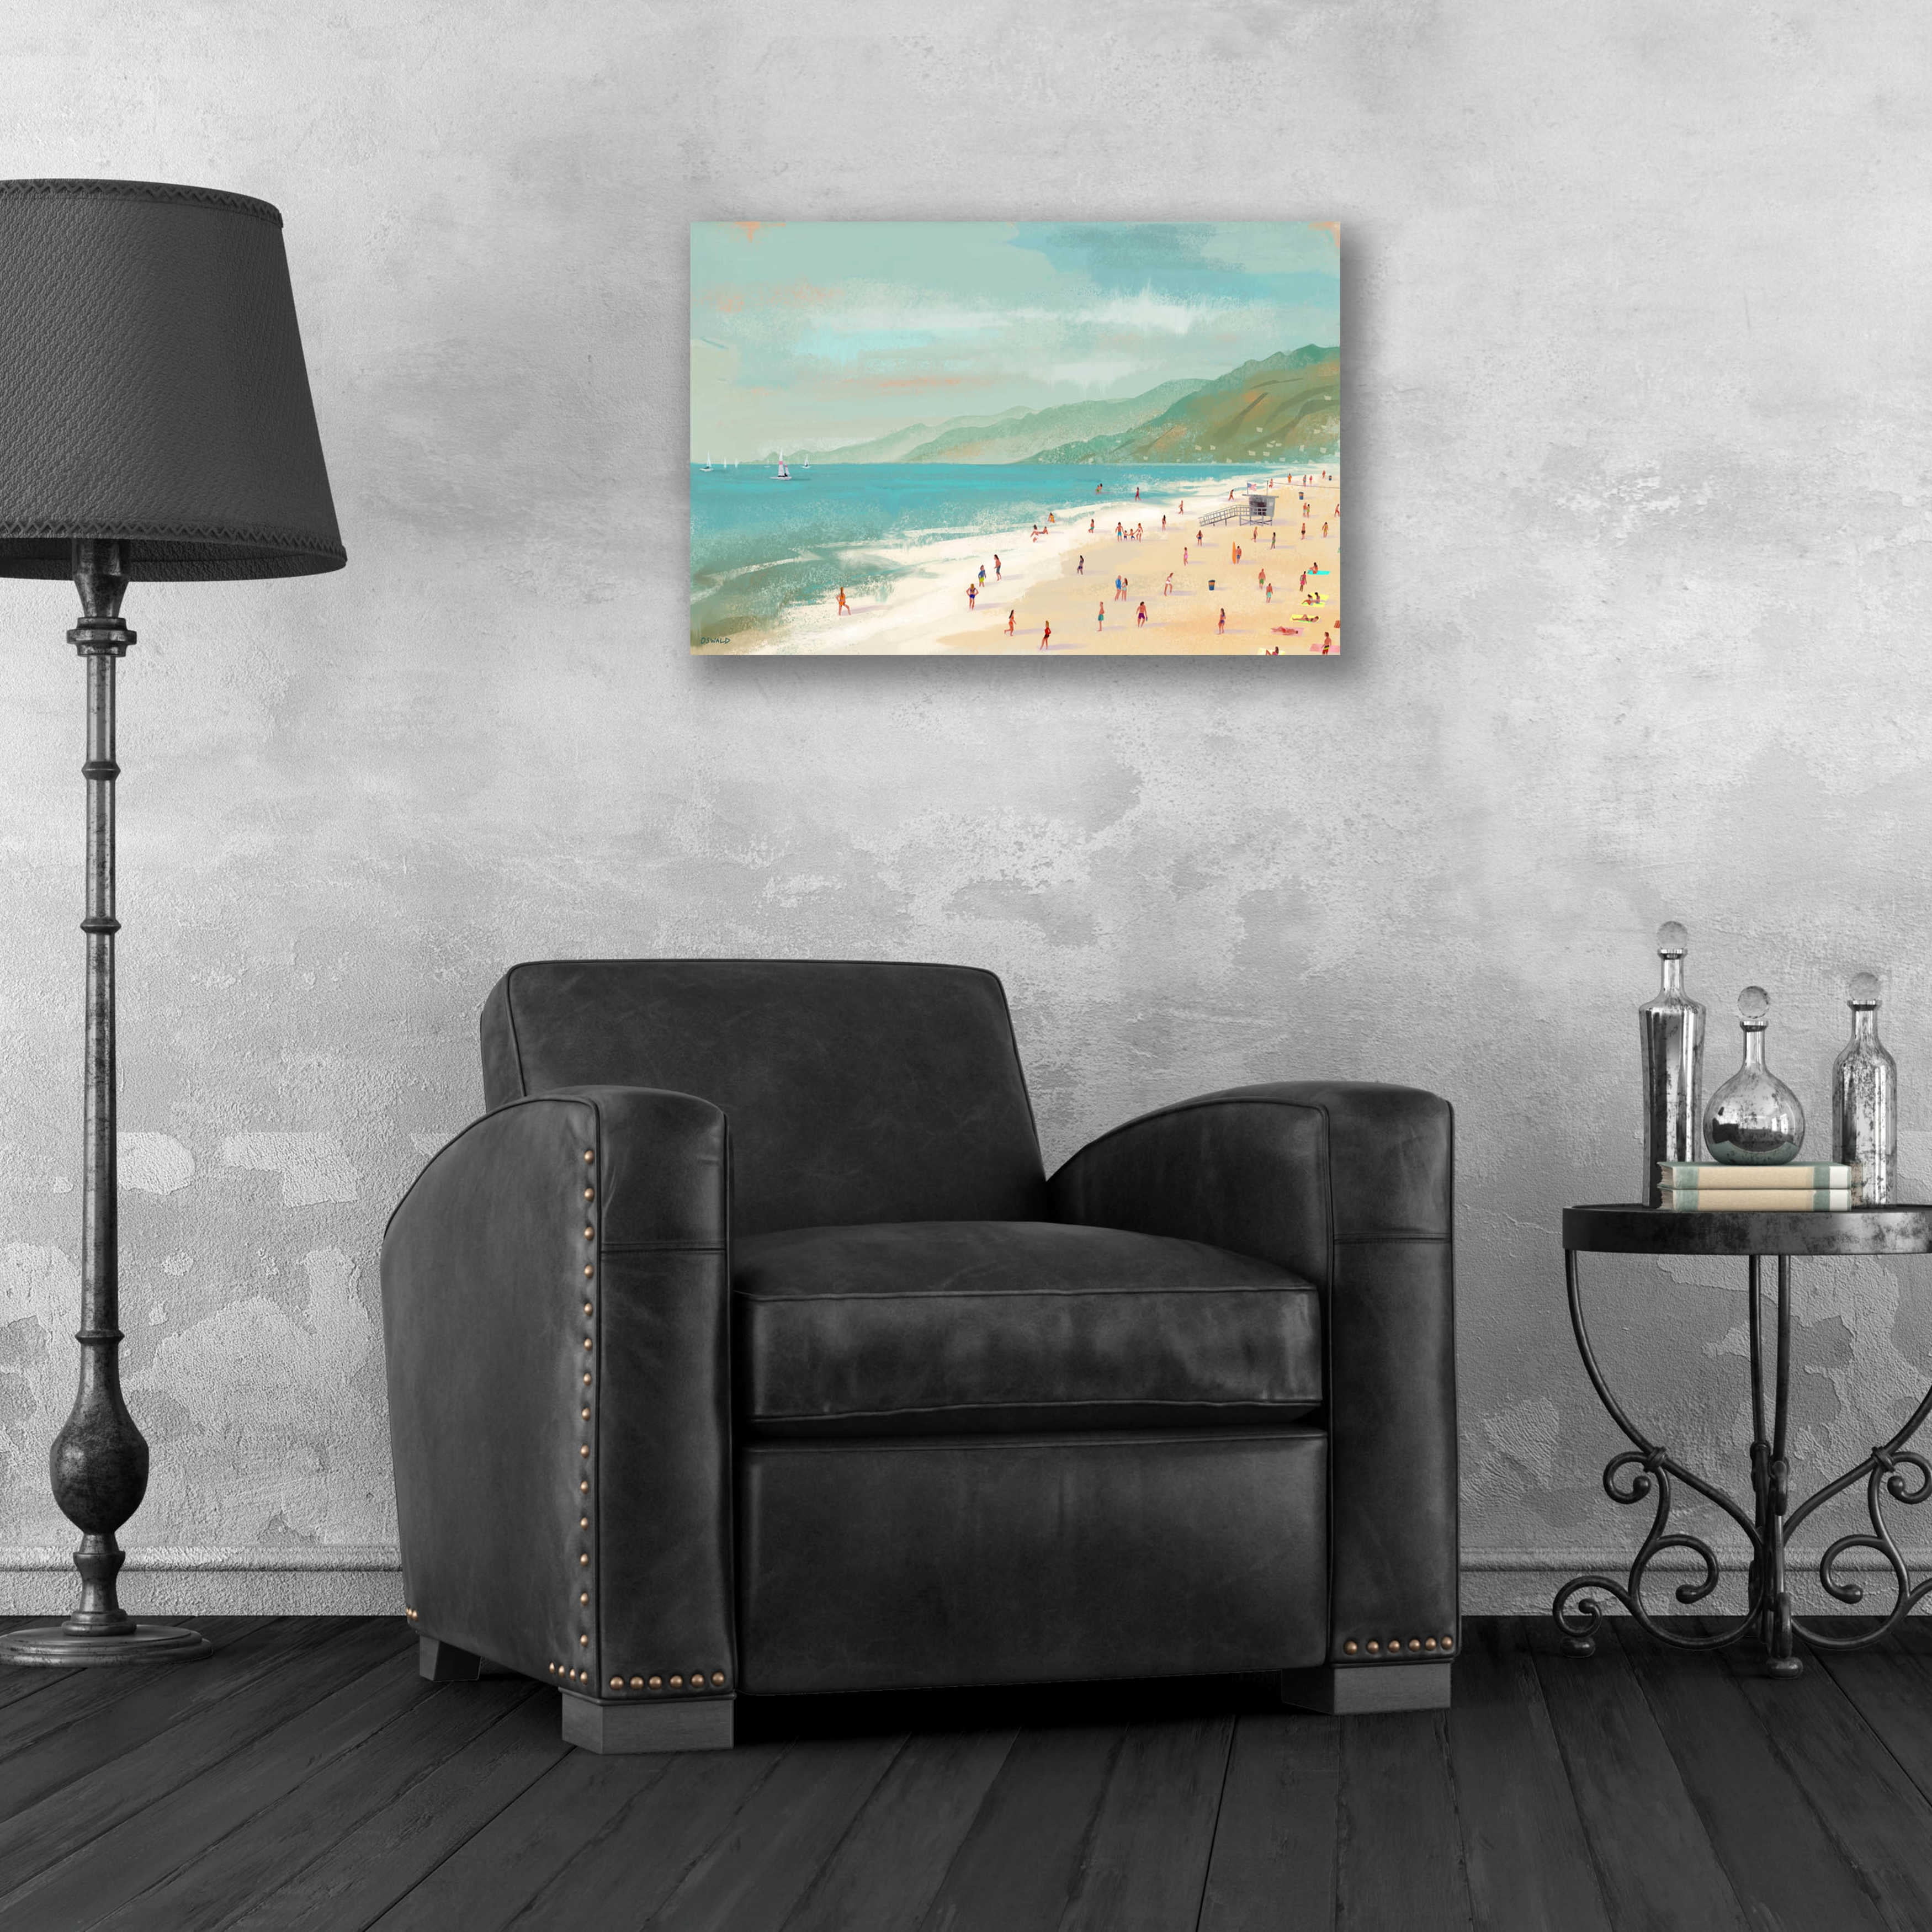 24 in x 36 in, Ready-to-Hang Santa Monica Beach by Pete Oswald Premium Gallery-Wrapped Canvas Giclee Art